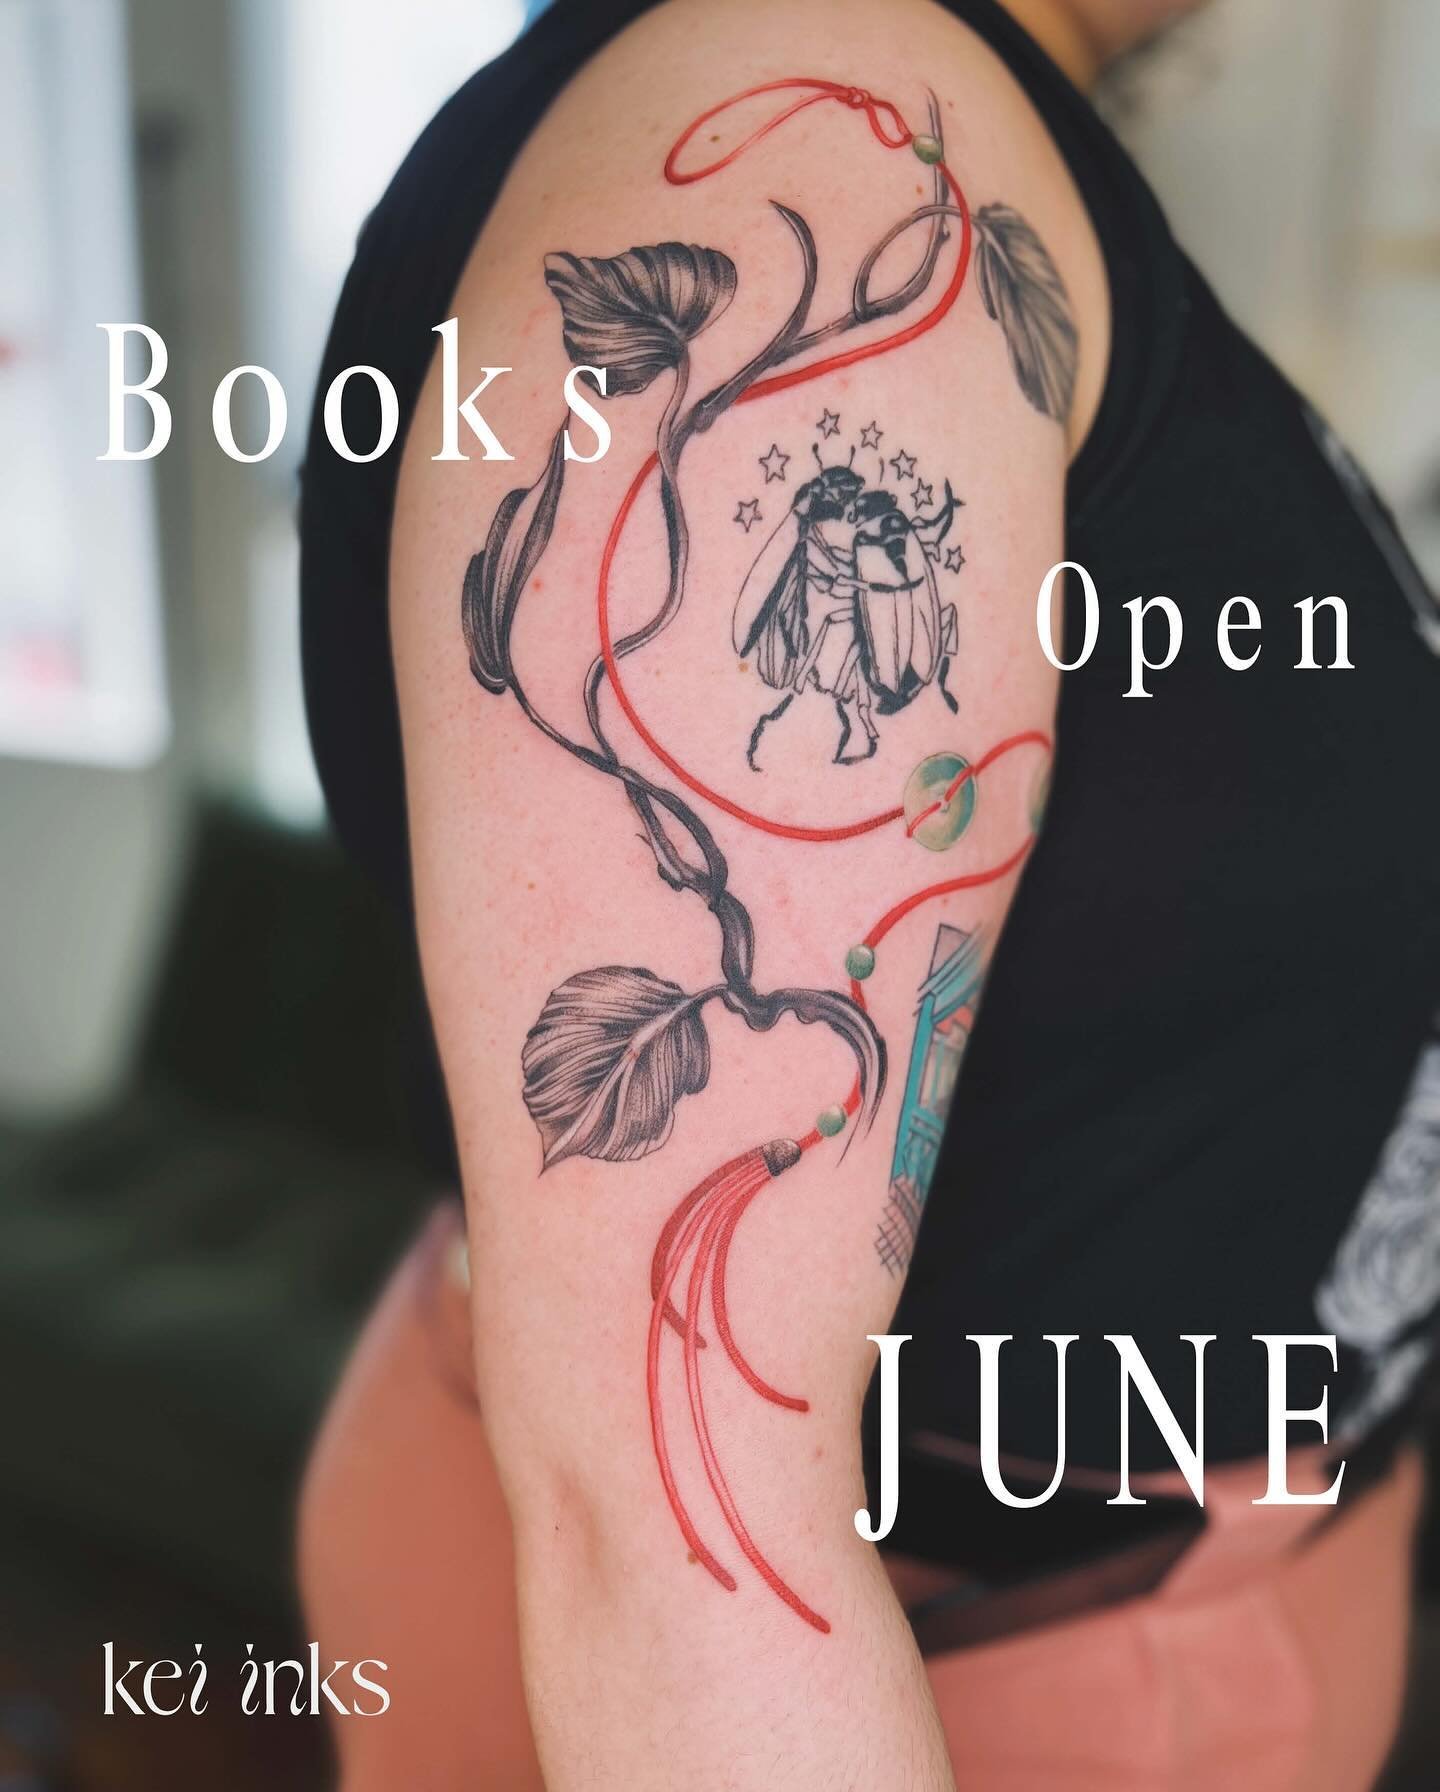 JUNE BOOKS OPEN

⟡ I am now taking appointments up to June! 
⟡ Please see &ldquo;DATES&rdquo; &ldquo;HOW TO BOOK&rdquo; and &ldquo;FAQs&rdquo; highlight before sending enquiry.
⟡ Flash prioritised, and limited customs will be selected. 

💌 DM or ema